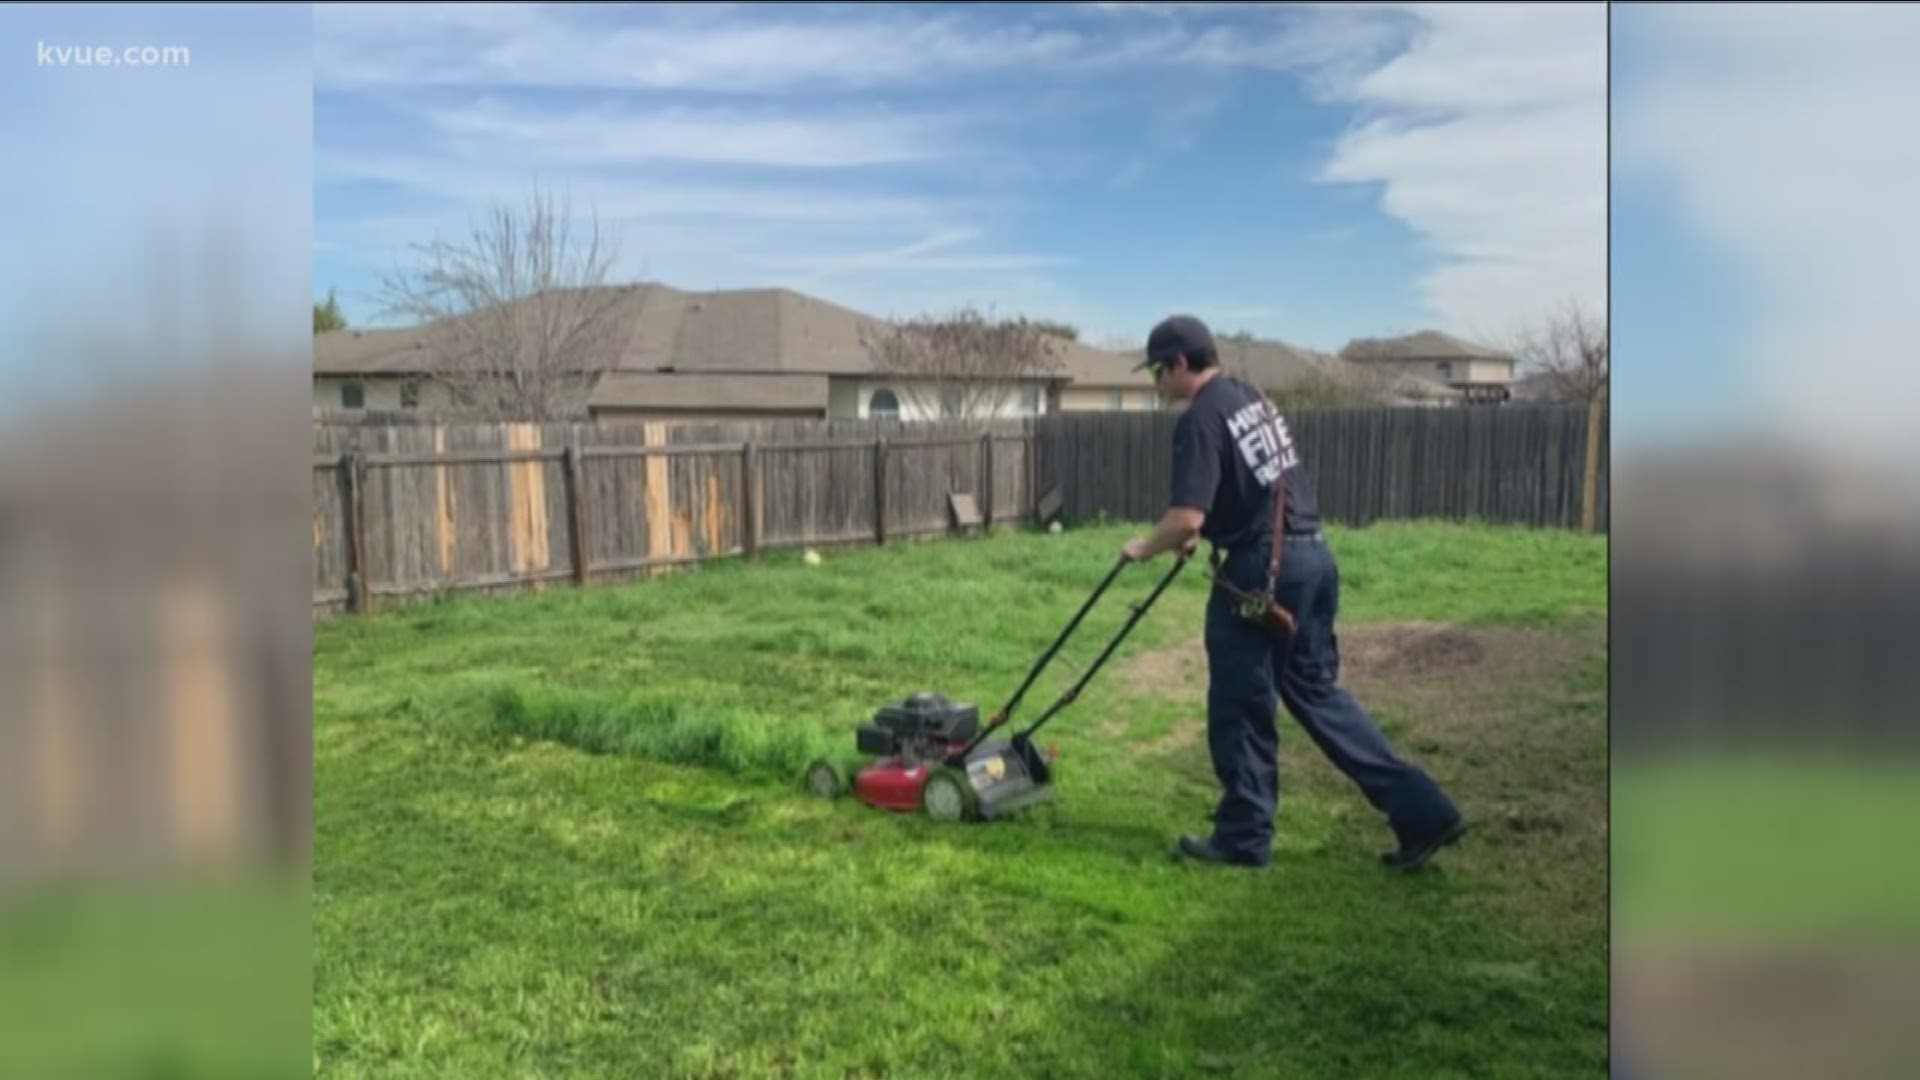 Bryan Palmer had a heart attack while mowing his lawn – and the Hutto Fire Rescue firefighters stepped in to finish the chore.